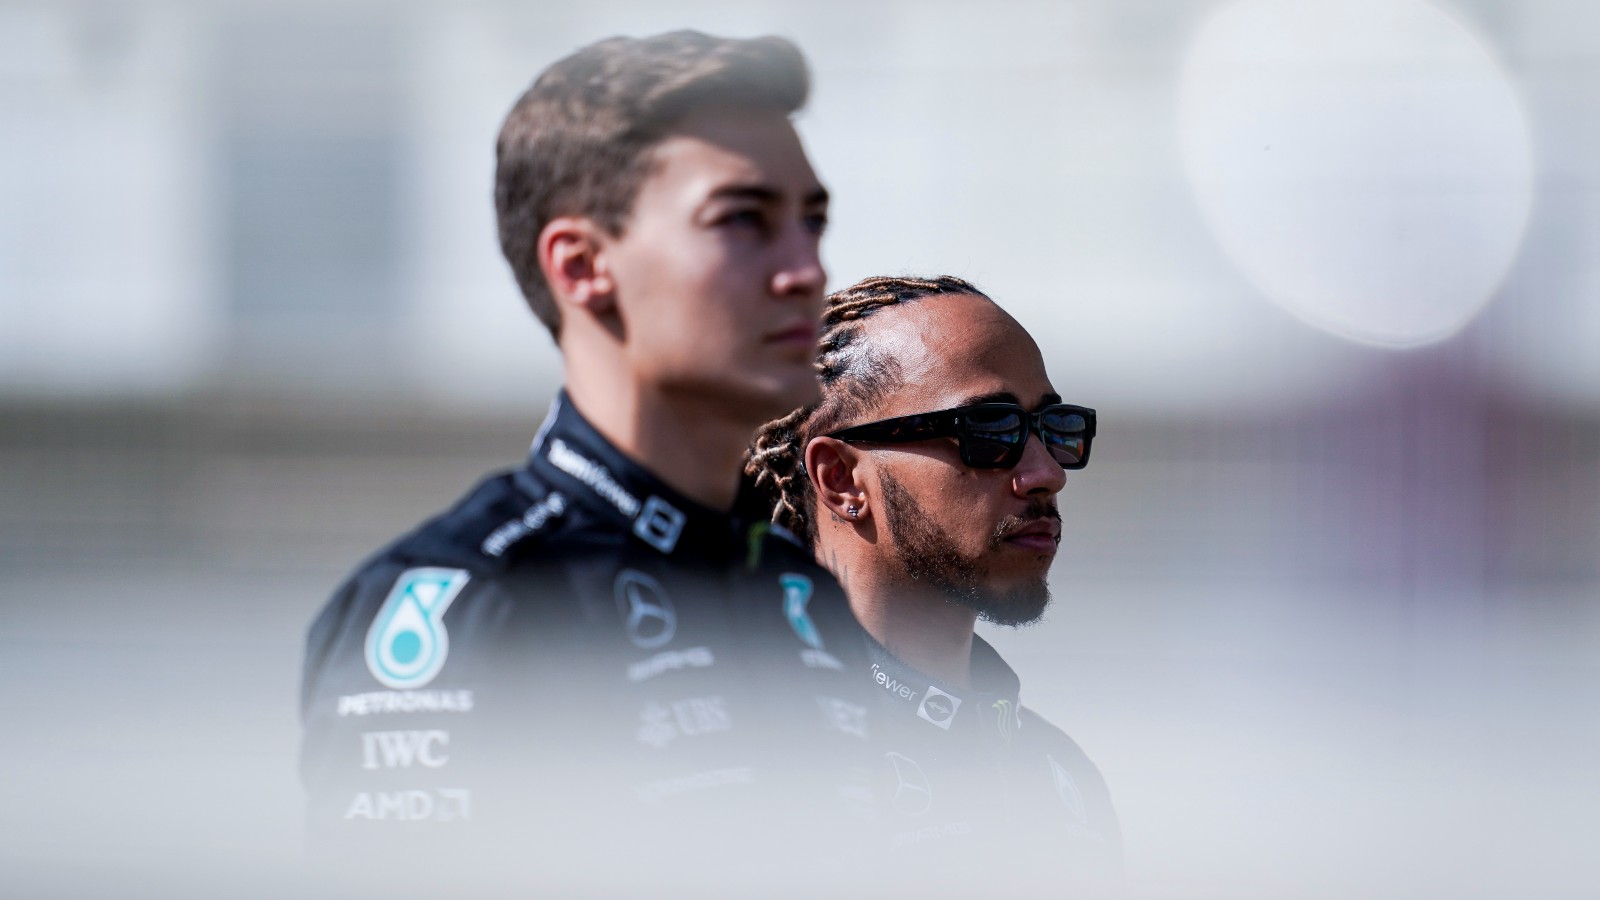 Mercedes' George Russell and Lewis Hamilton look forward. Bahrain, March 2022.